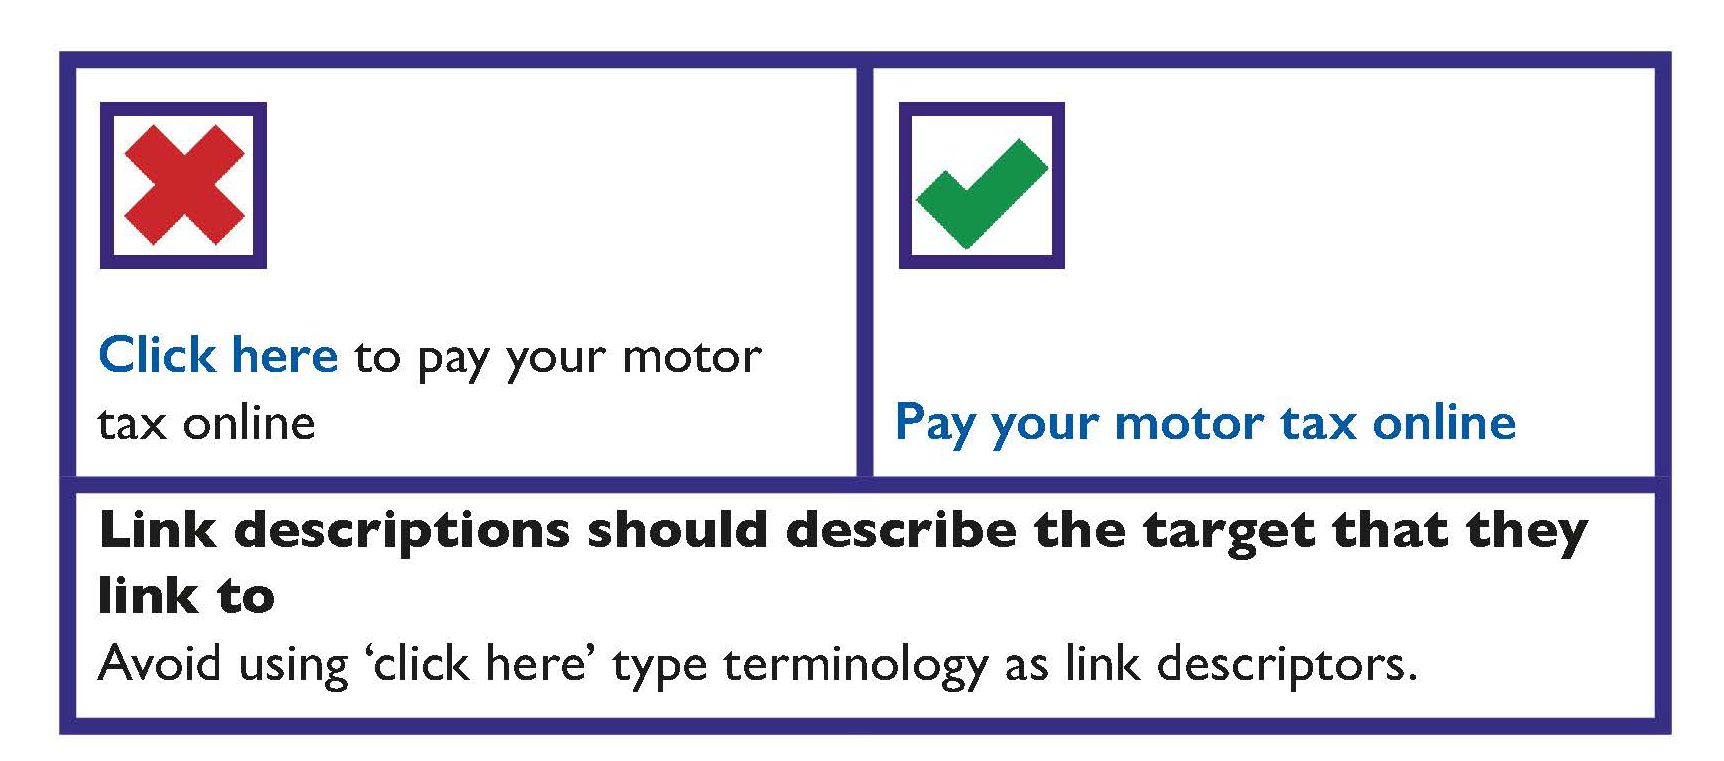 Avoid using 'click here' terminology for link descriptors. Links descriptors should describe the target that they link to.